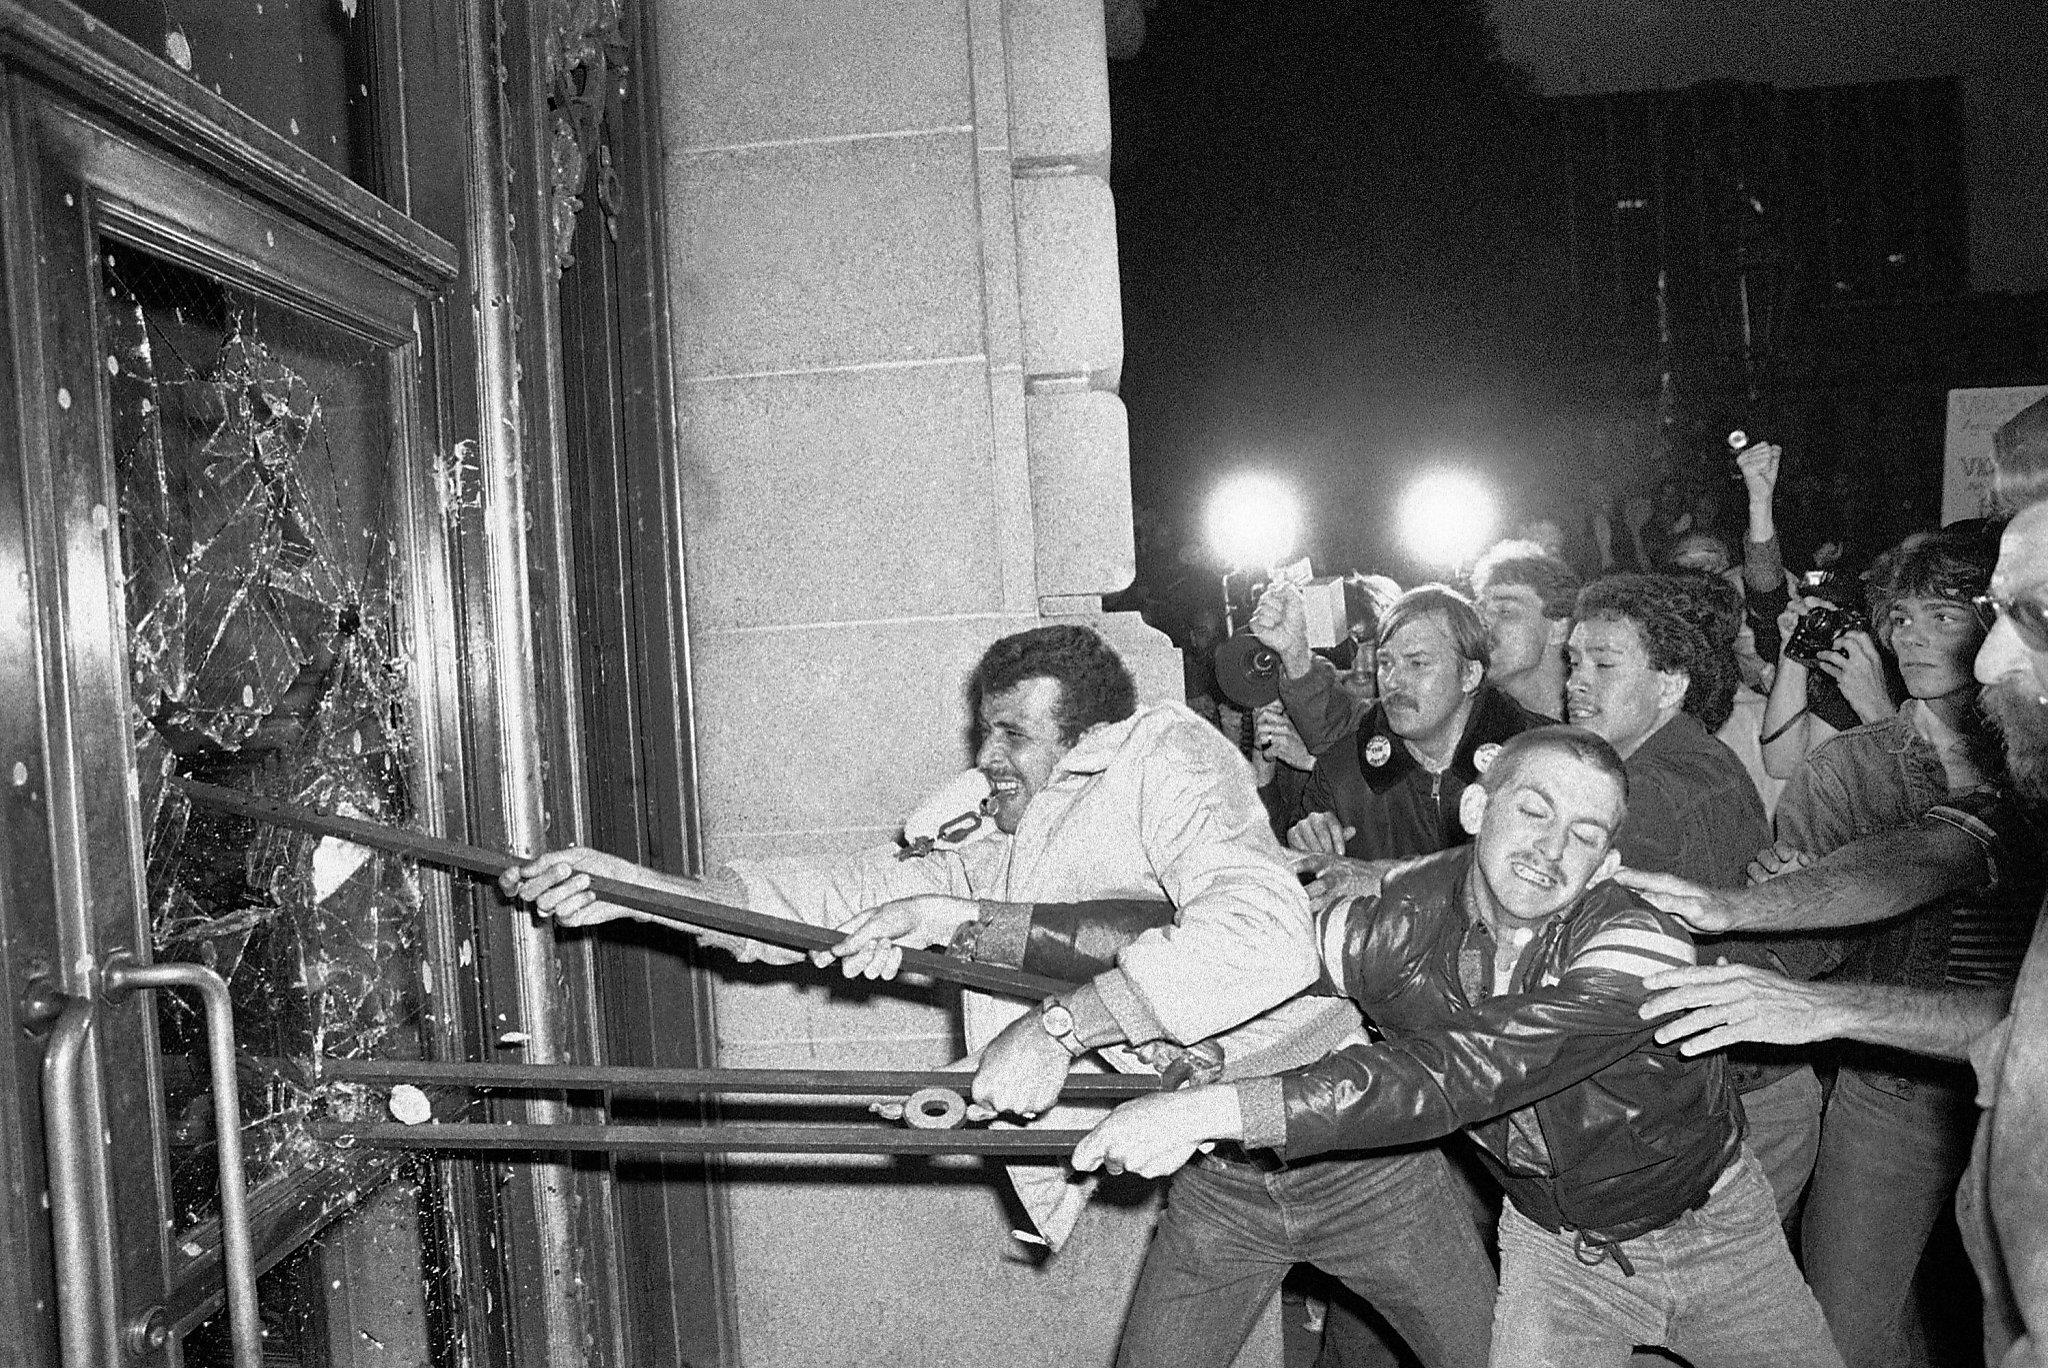 Today marks 40 years since the White Night riots roiled San Francisco